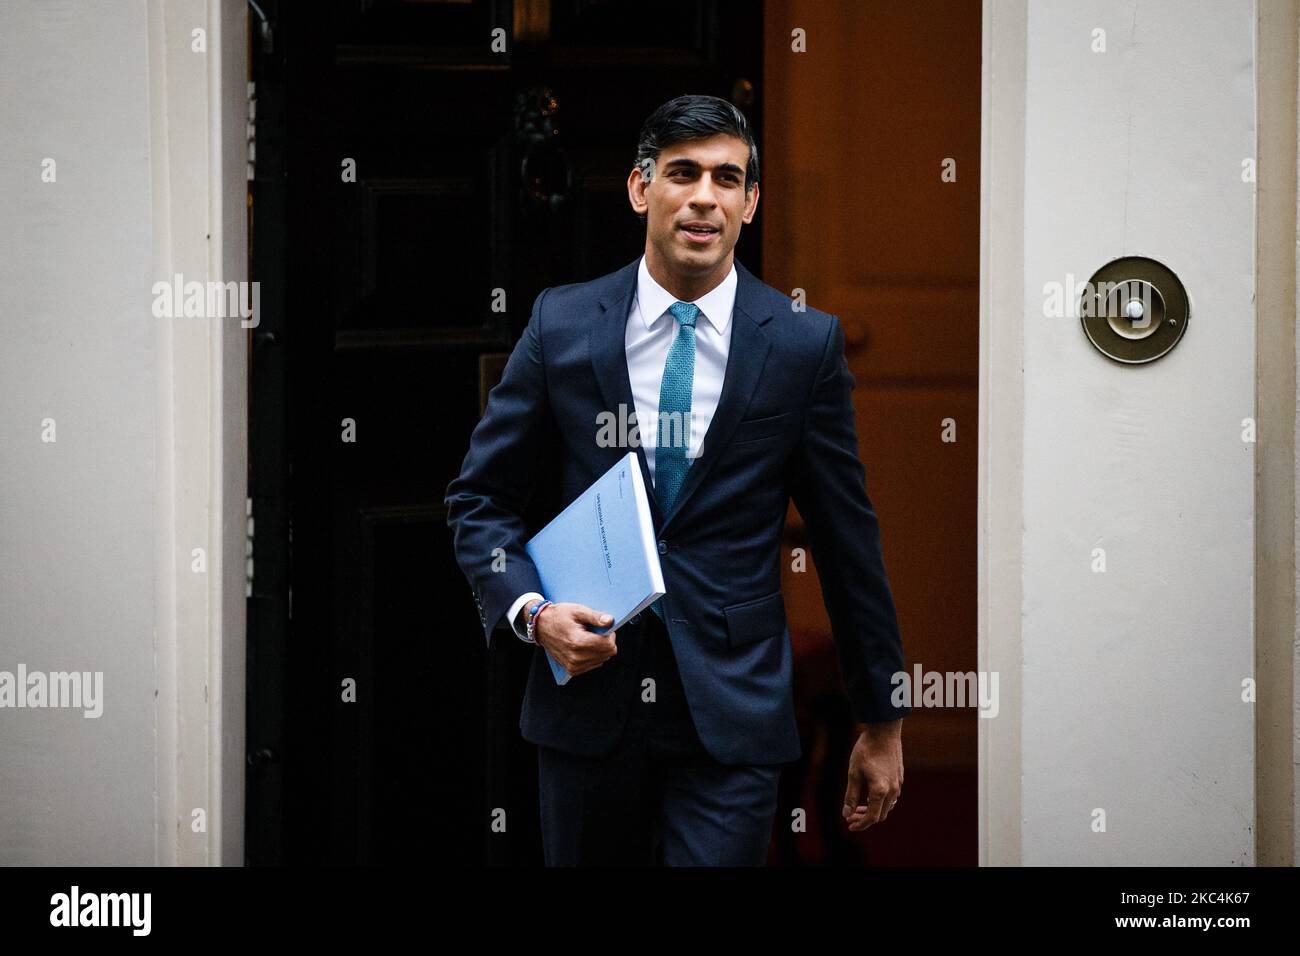 Chancellor of the Exchequer Rishi Sunak, Conservative Party MP for Richmond (Yorks), leaves 11 Downing Street to announce the Treasury's one-year spending review in the House of Commons in London, England, on November 25, 2020. The review is understood to include a 4.3 billion pound package of investment in job creation, with any decisions on tax rises and spending cuts deferred until the country is further clear of the coronavirus crisis that has consumed public finances this year. (Photo by David Cliff/NurPhoto) Stock Photo